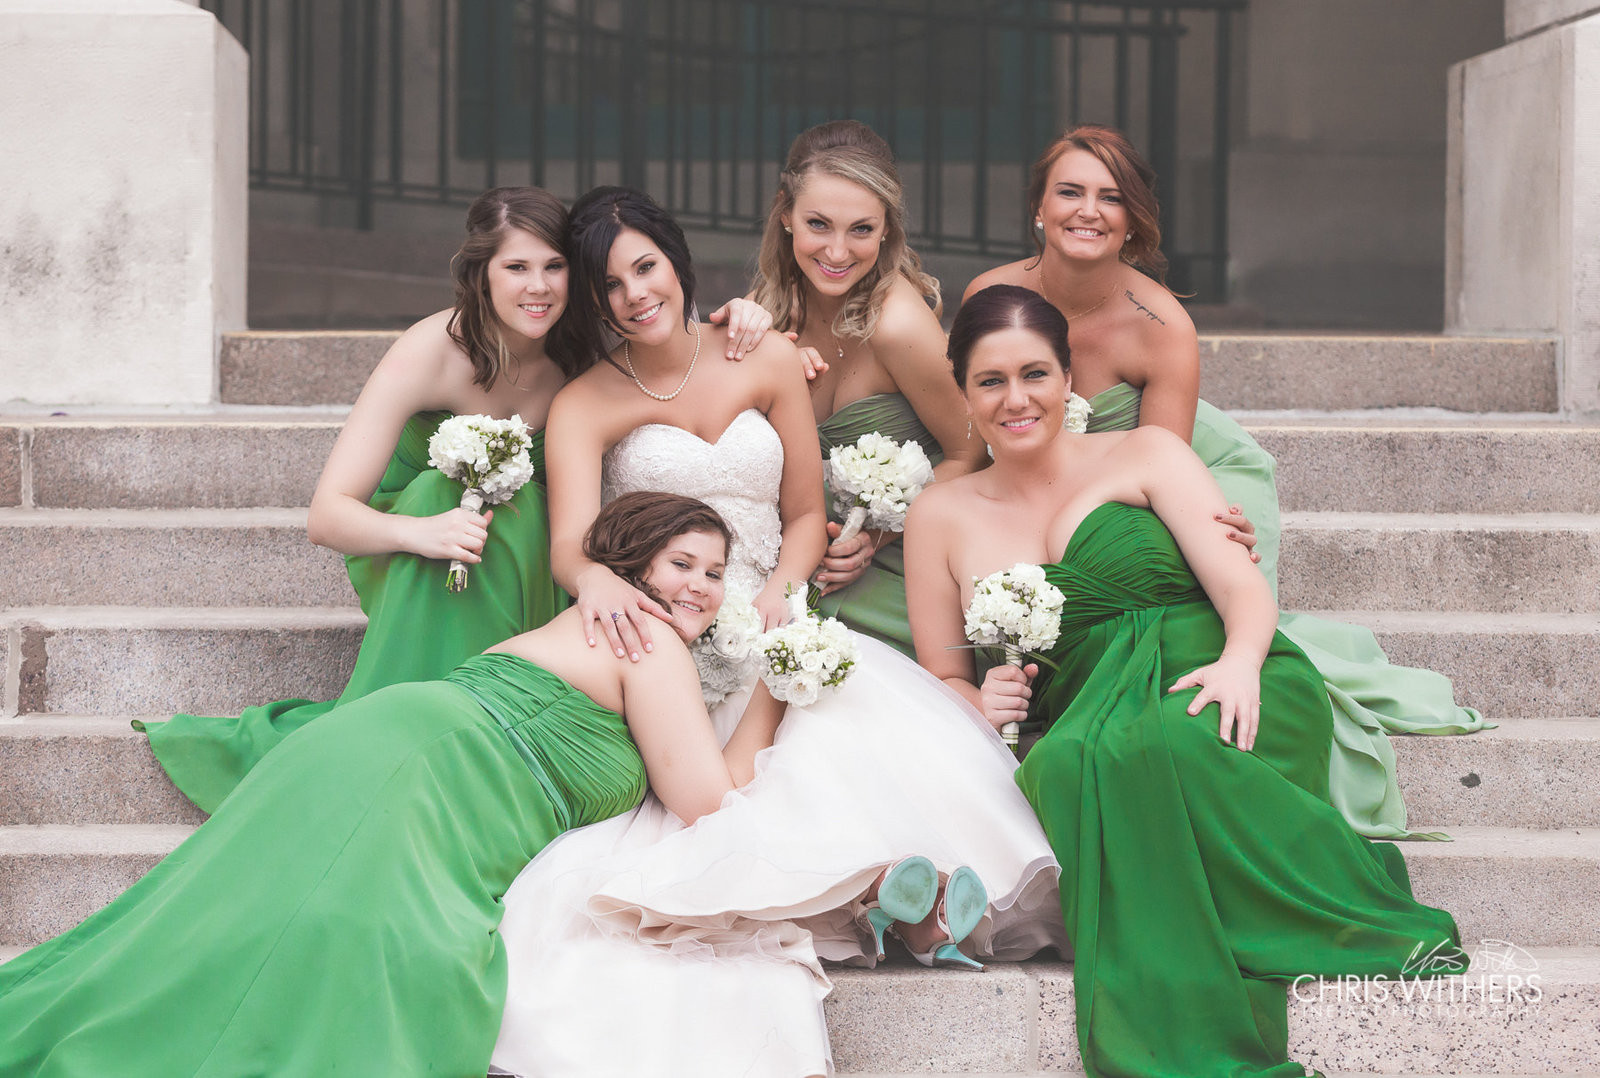 Springfield Illinois Wedding Photographer - Chris Withers Photography (18 of 159)